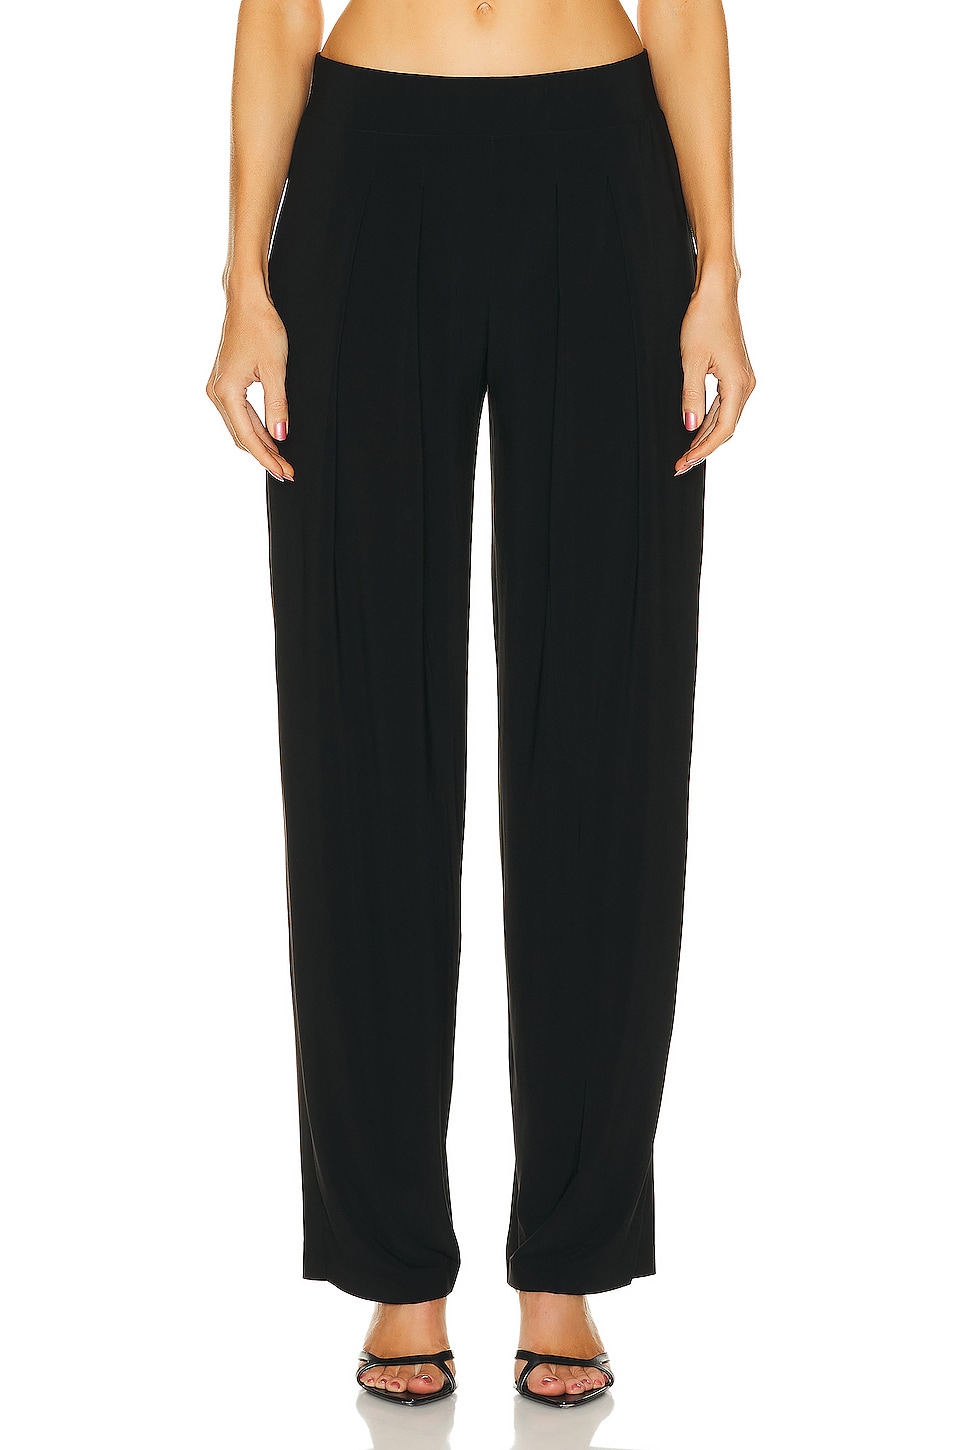 Image 1 of Norma Kamali Low Rise Pleated Trouser in Black